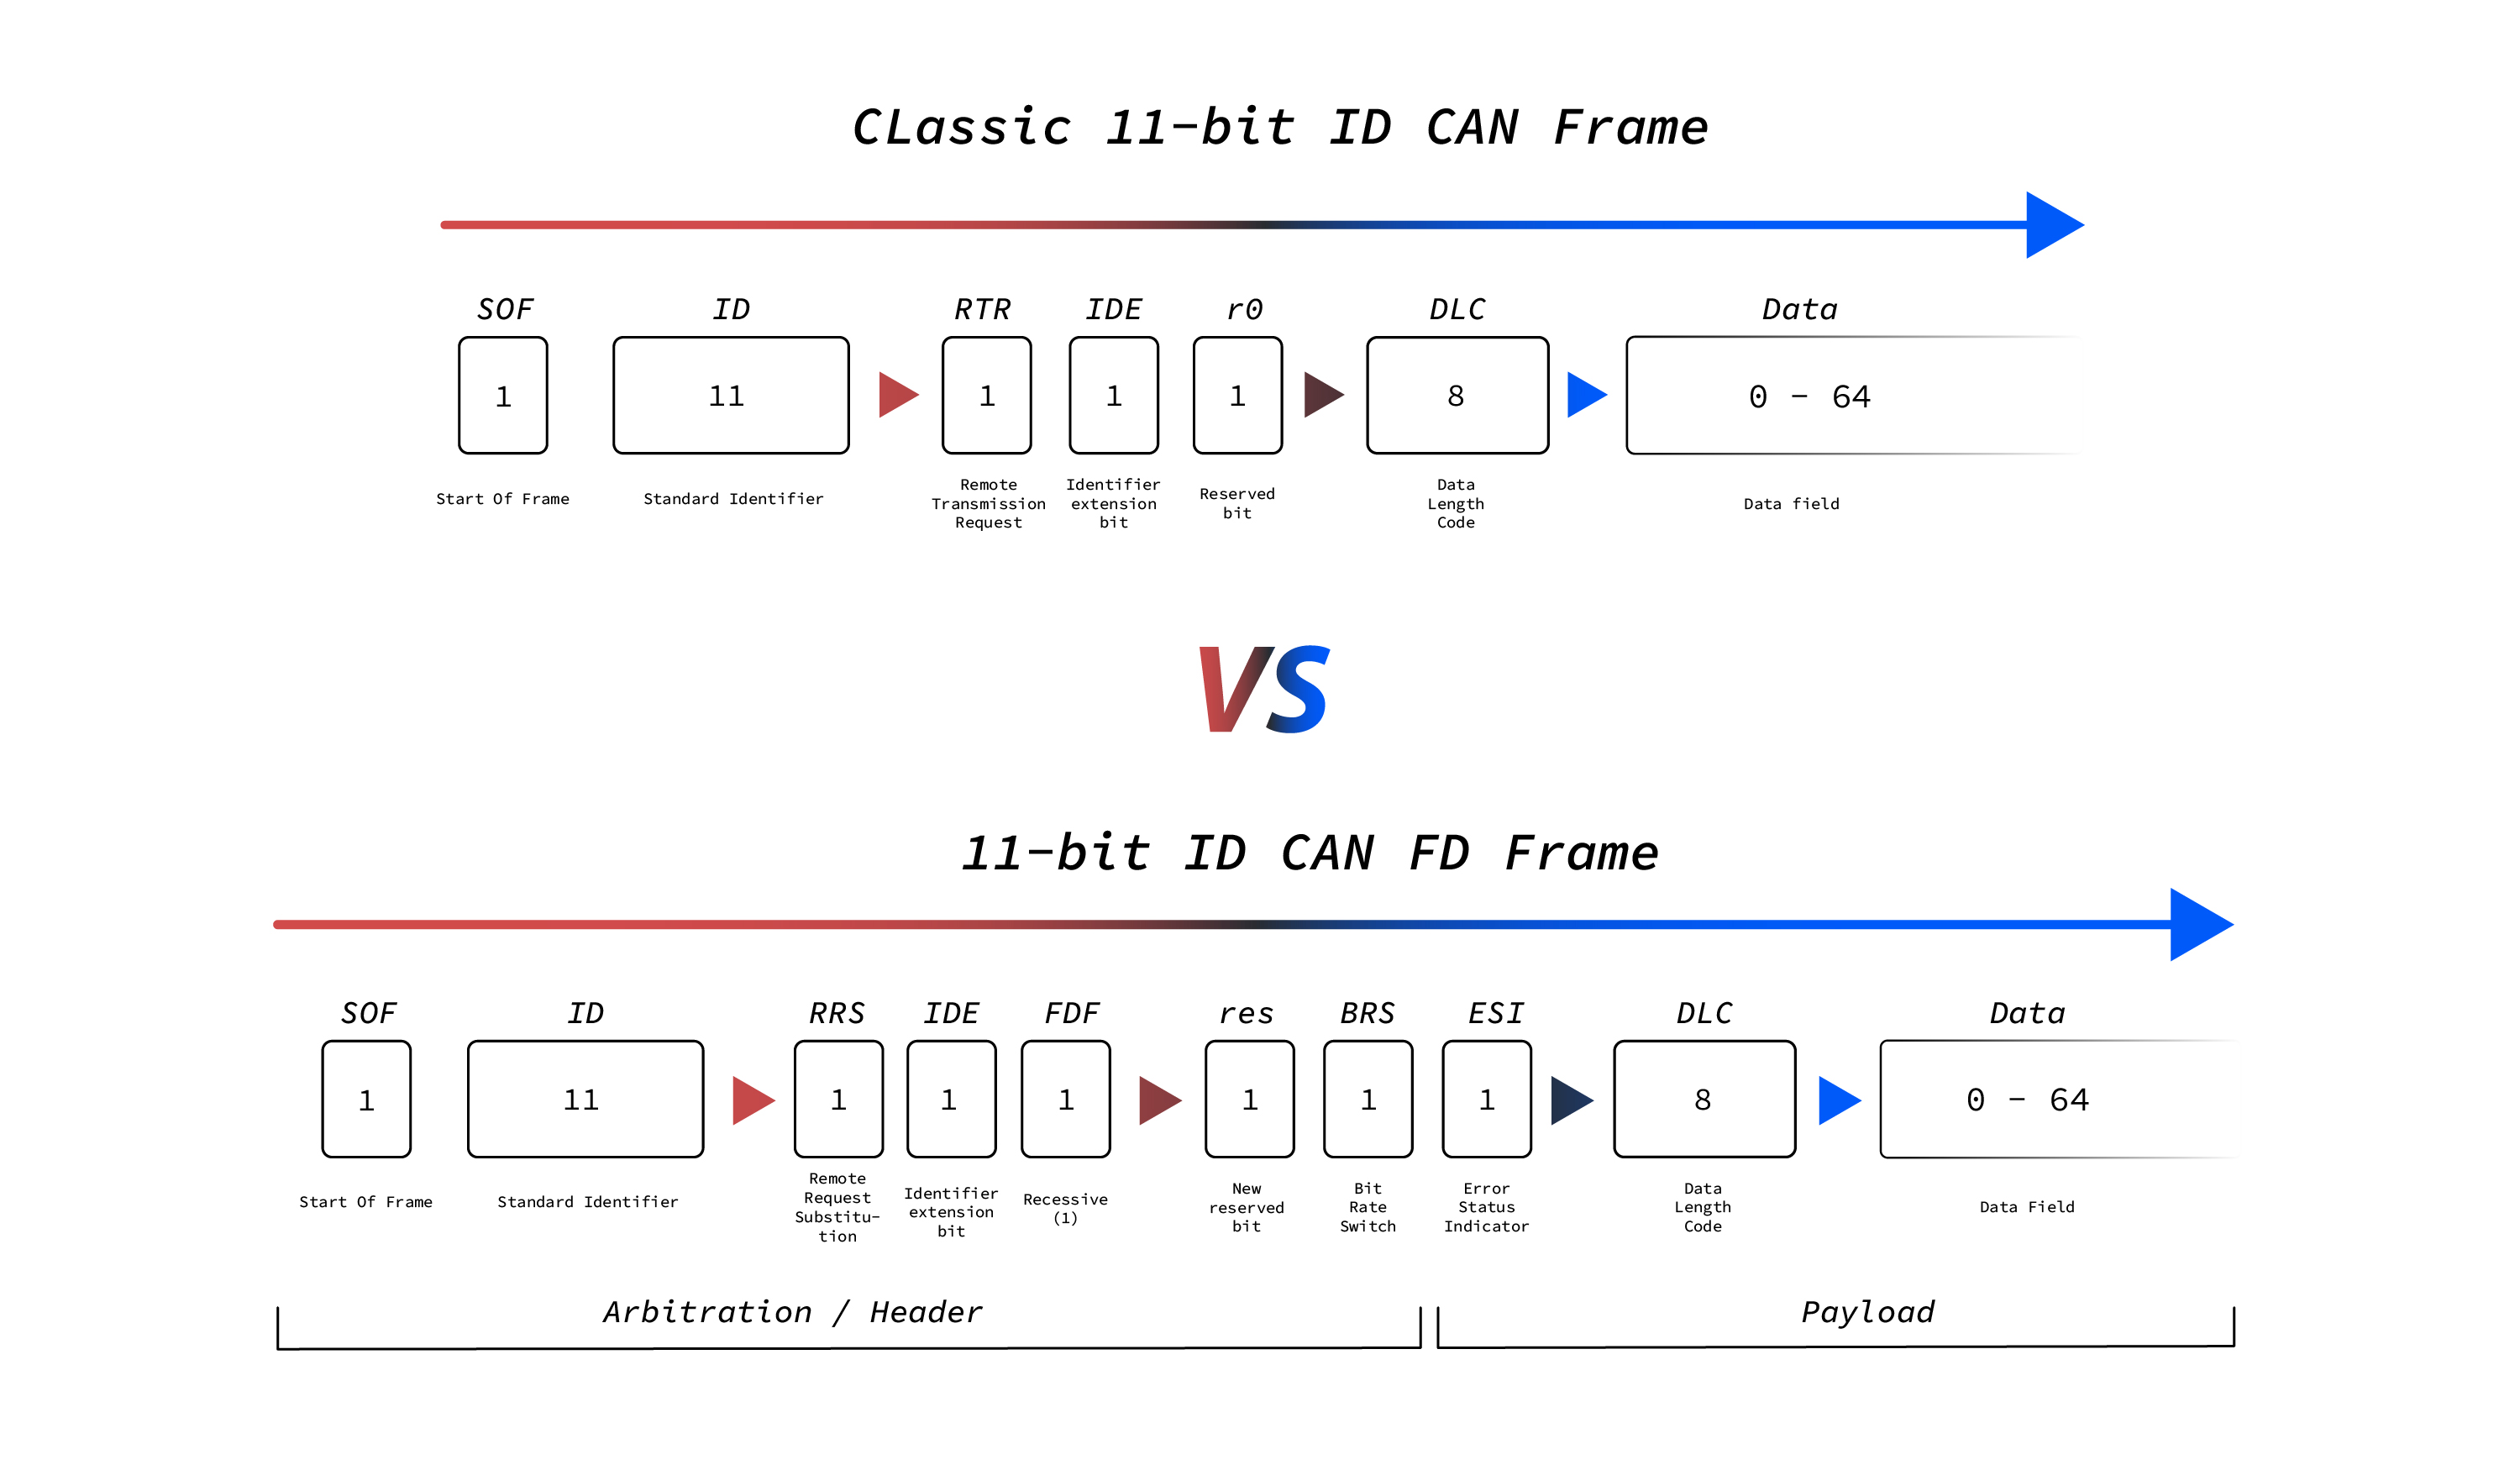 an illustration of the key differences between can fd and classical can bus